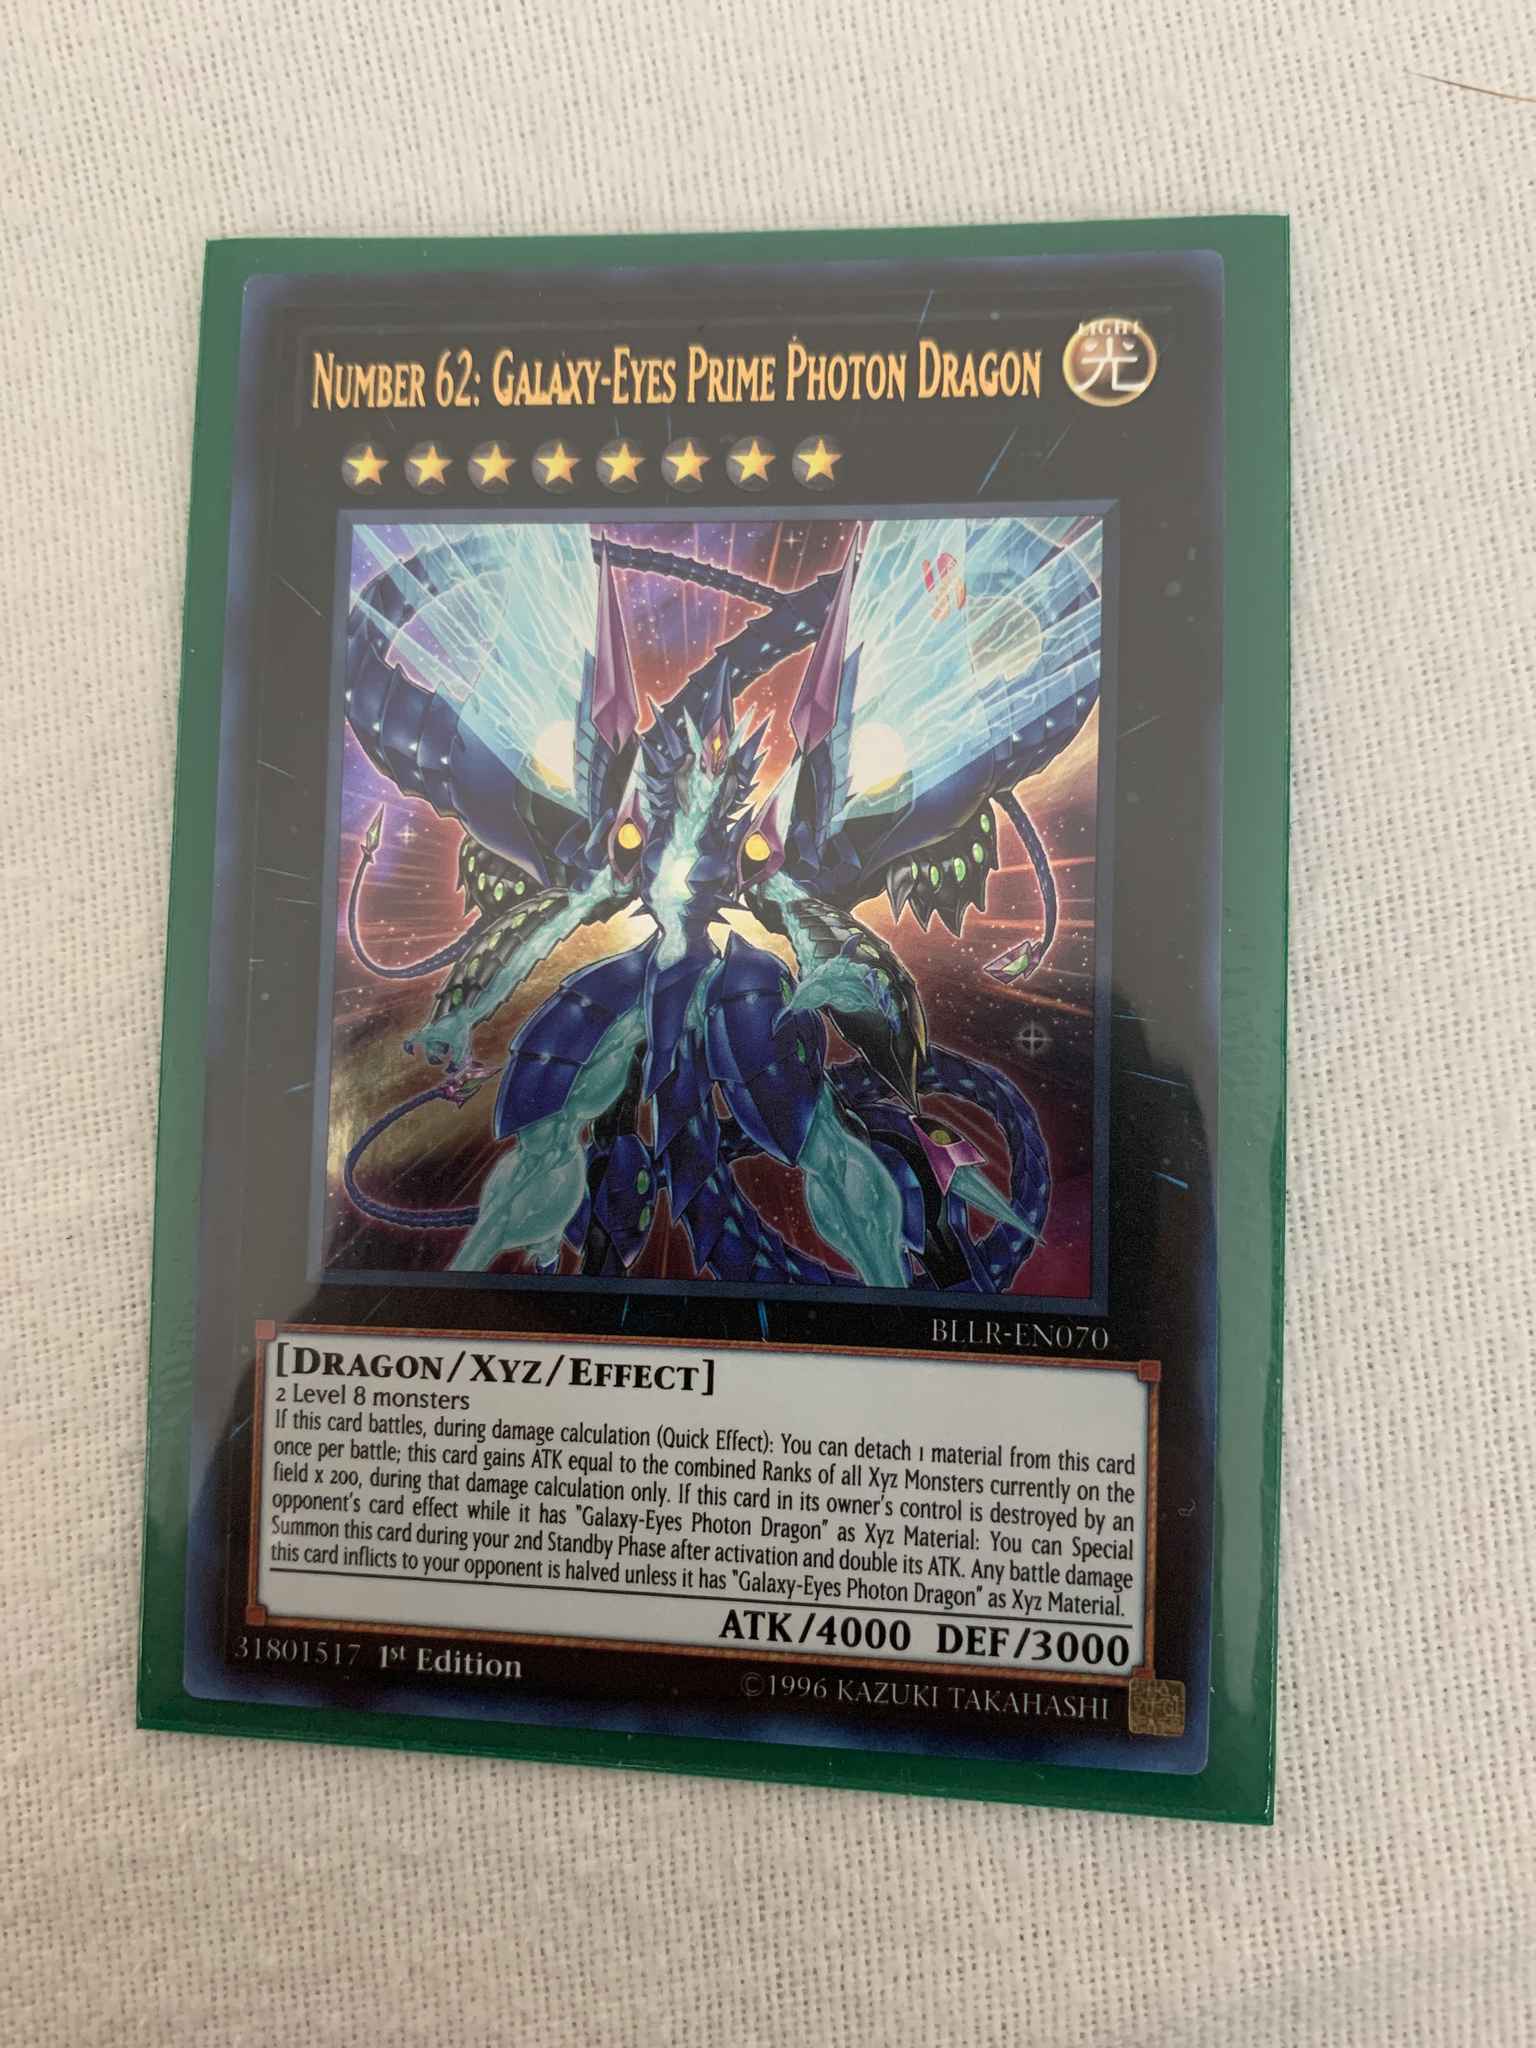 Number 62 Galaxy Eyes Prime Photon Dragon Number 62 Galaxy Eyes Prime Photon Dragon Battles Of Legend Light S Revenge Yugioh Online Gaming Store For Cards Miniatures Singles Packs Booster Boxes